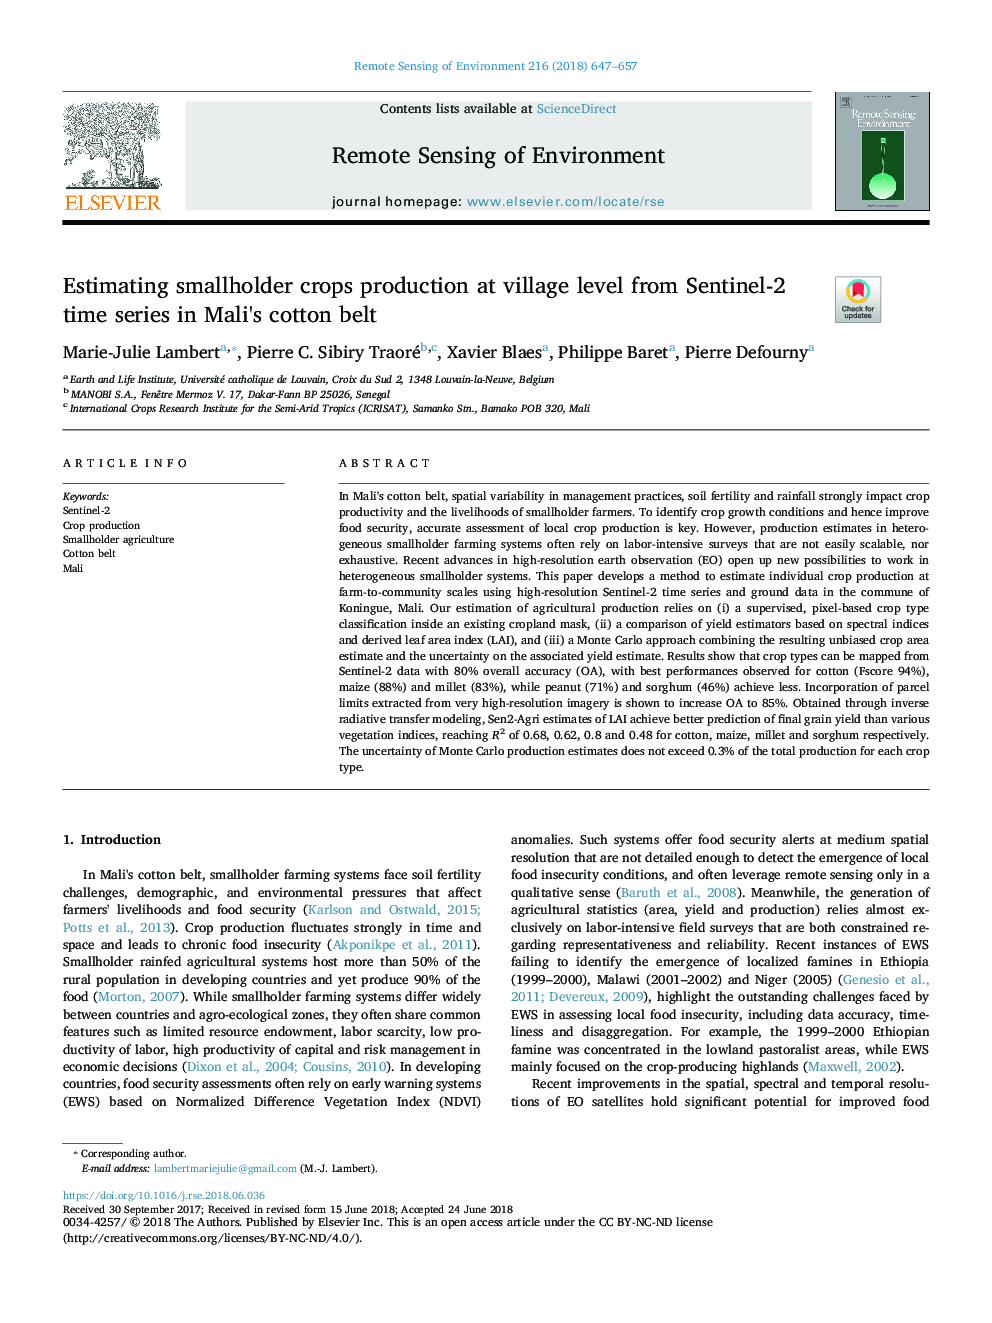 Estimating smallholder crops production at village level from Sentinel-2 time series in Mali's cotton belt